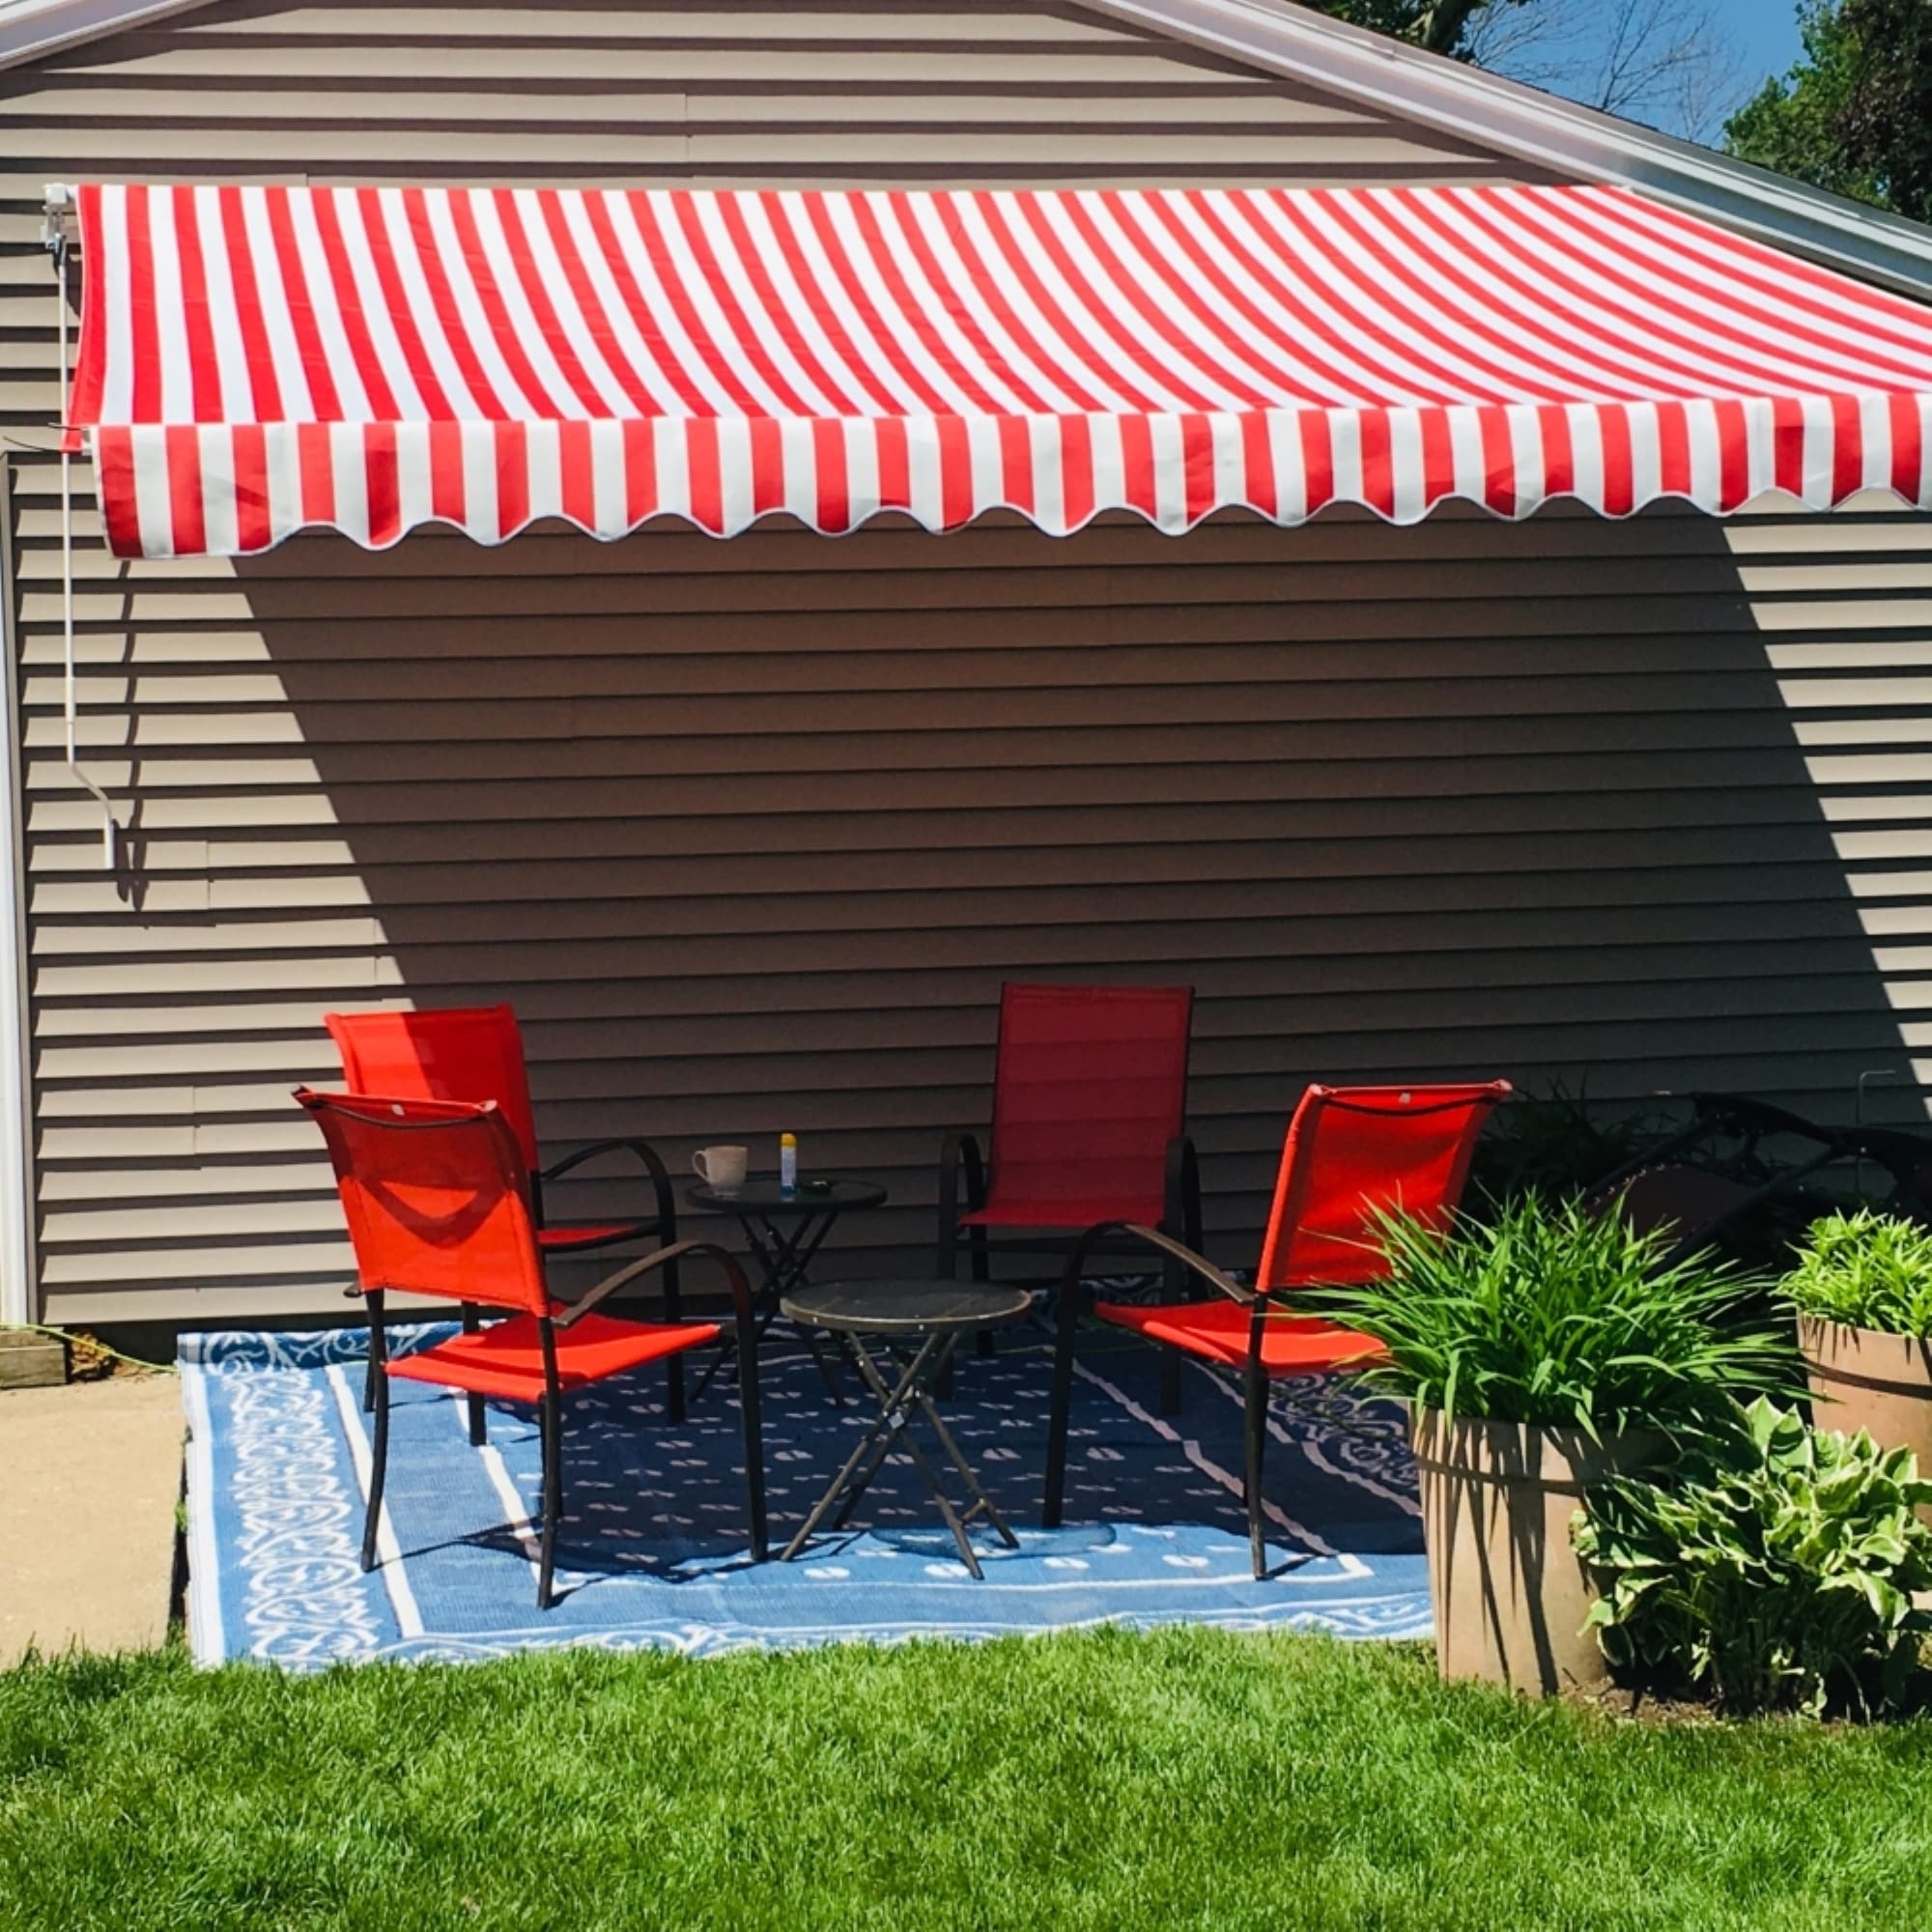 ALEKO  Retractable 12 x 10 feet Awning Home Patio Canopy Red/White